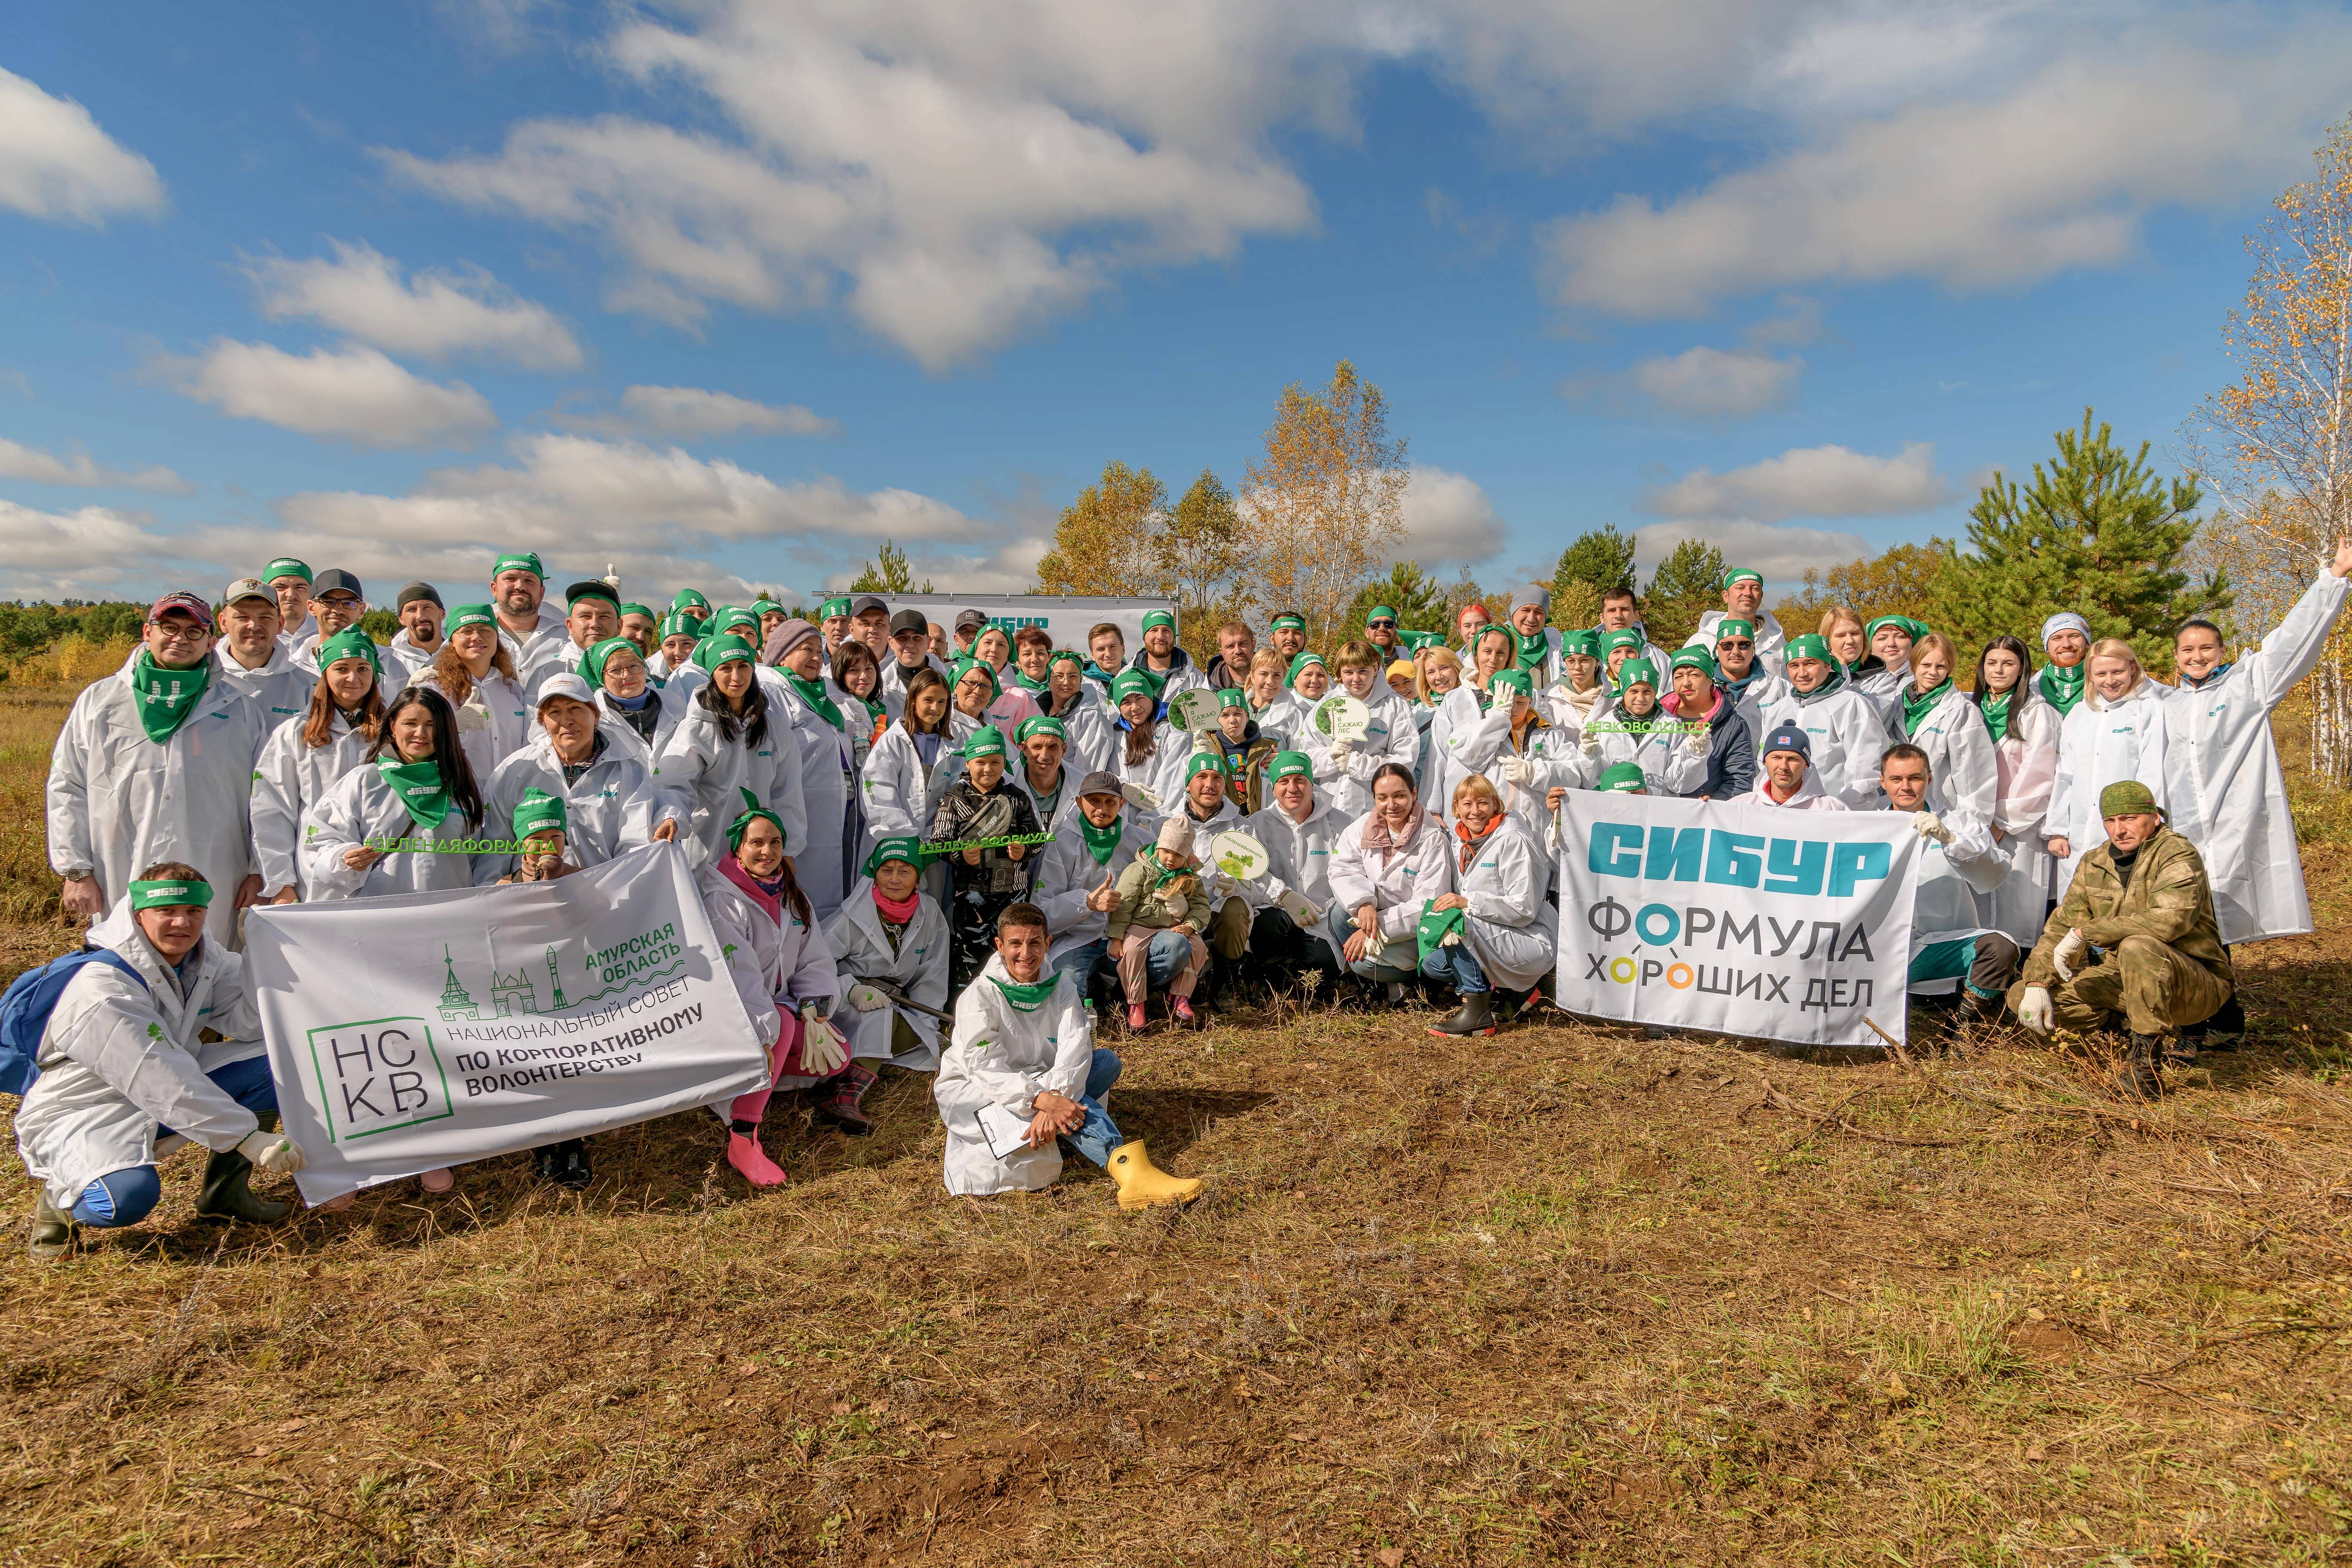 The city of Svobodny hosted an autumnal tree- planting campaign as part of SIBUR's Green Formula program